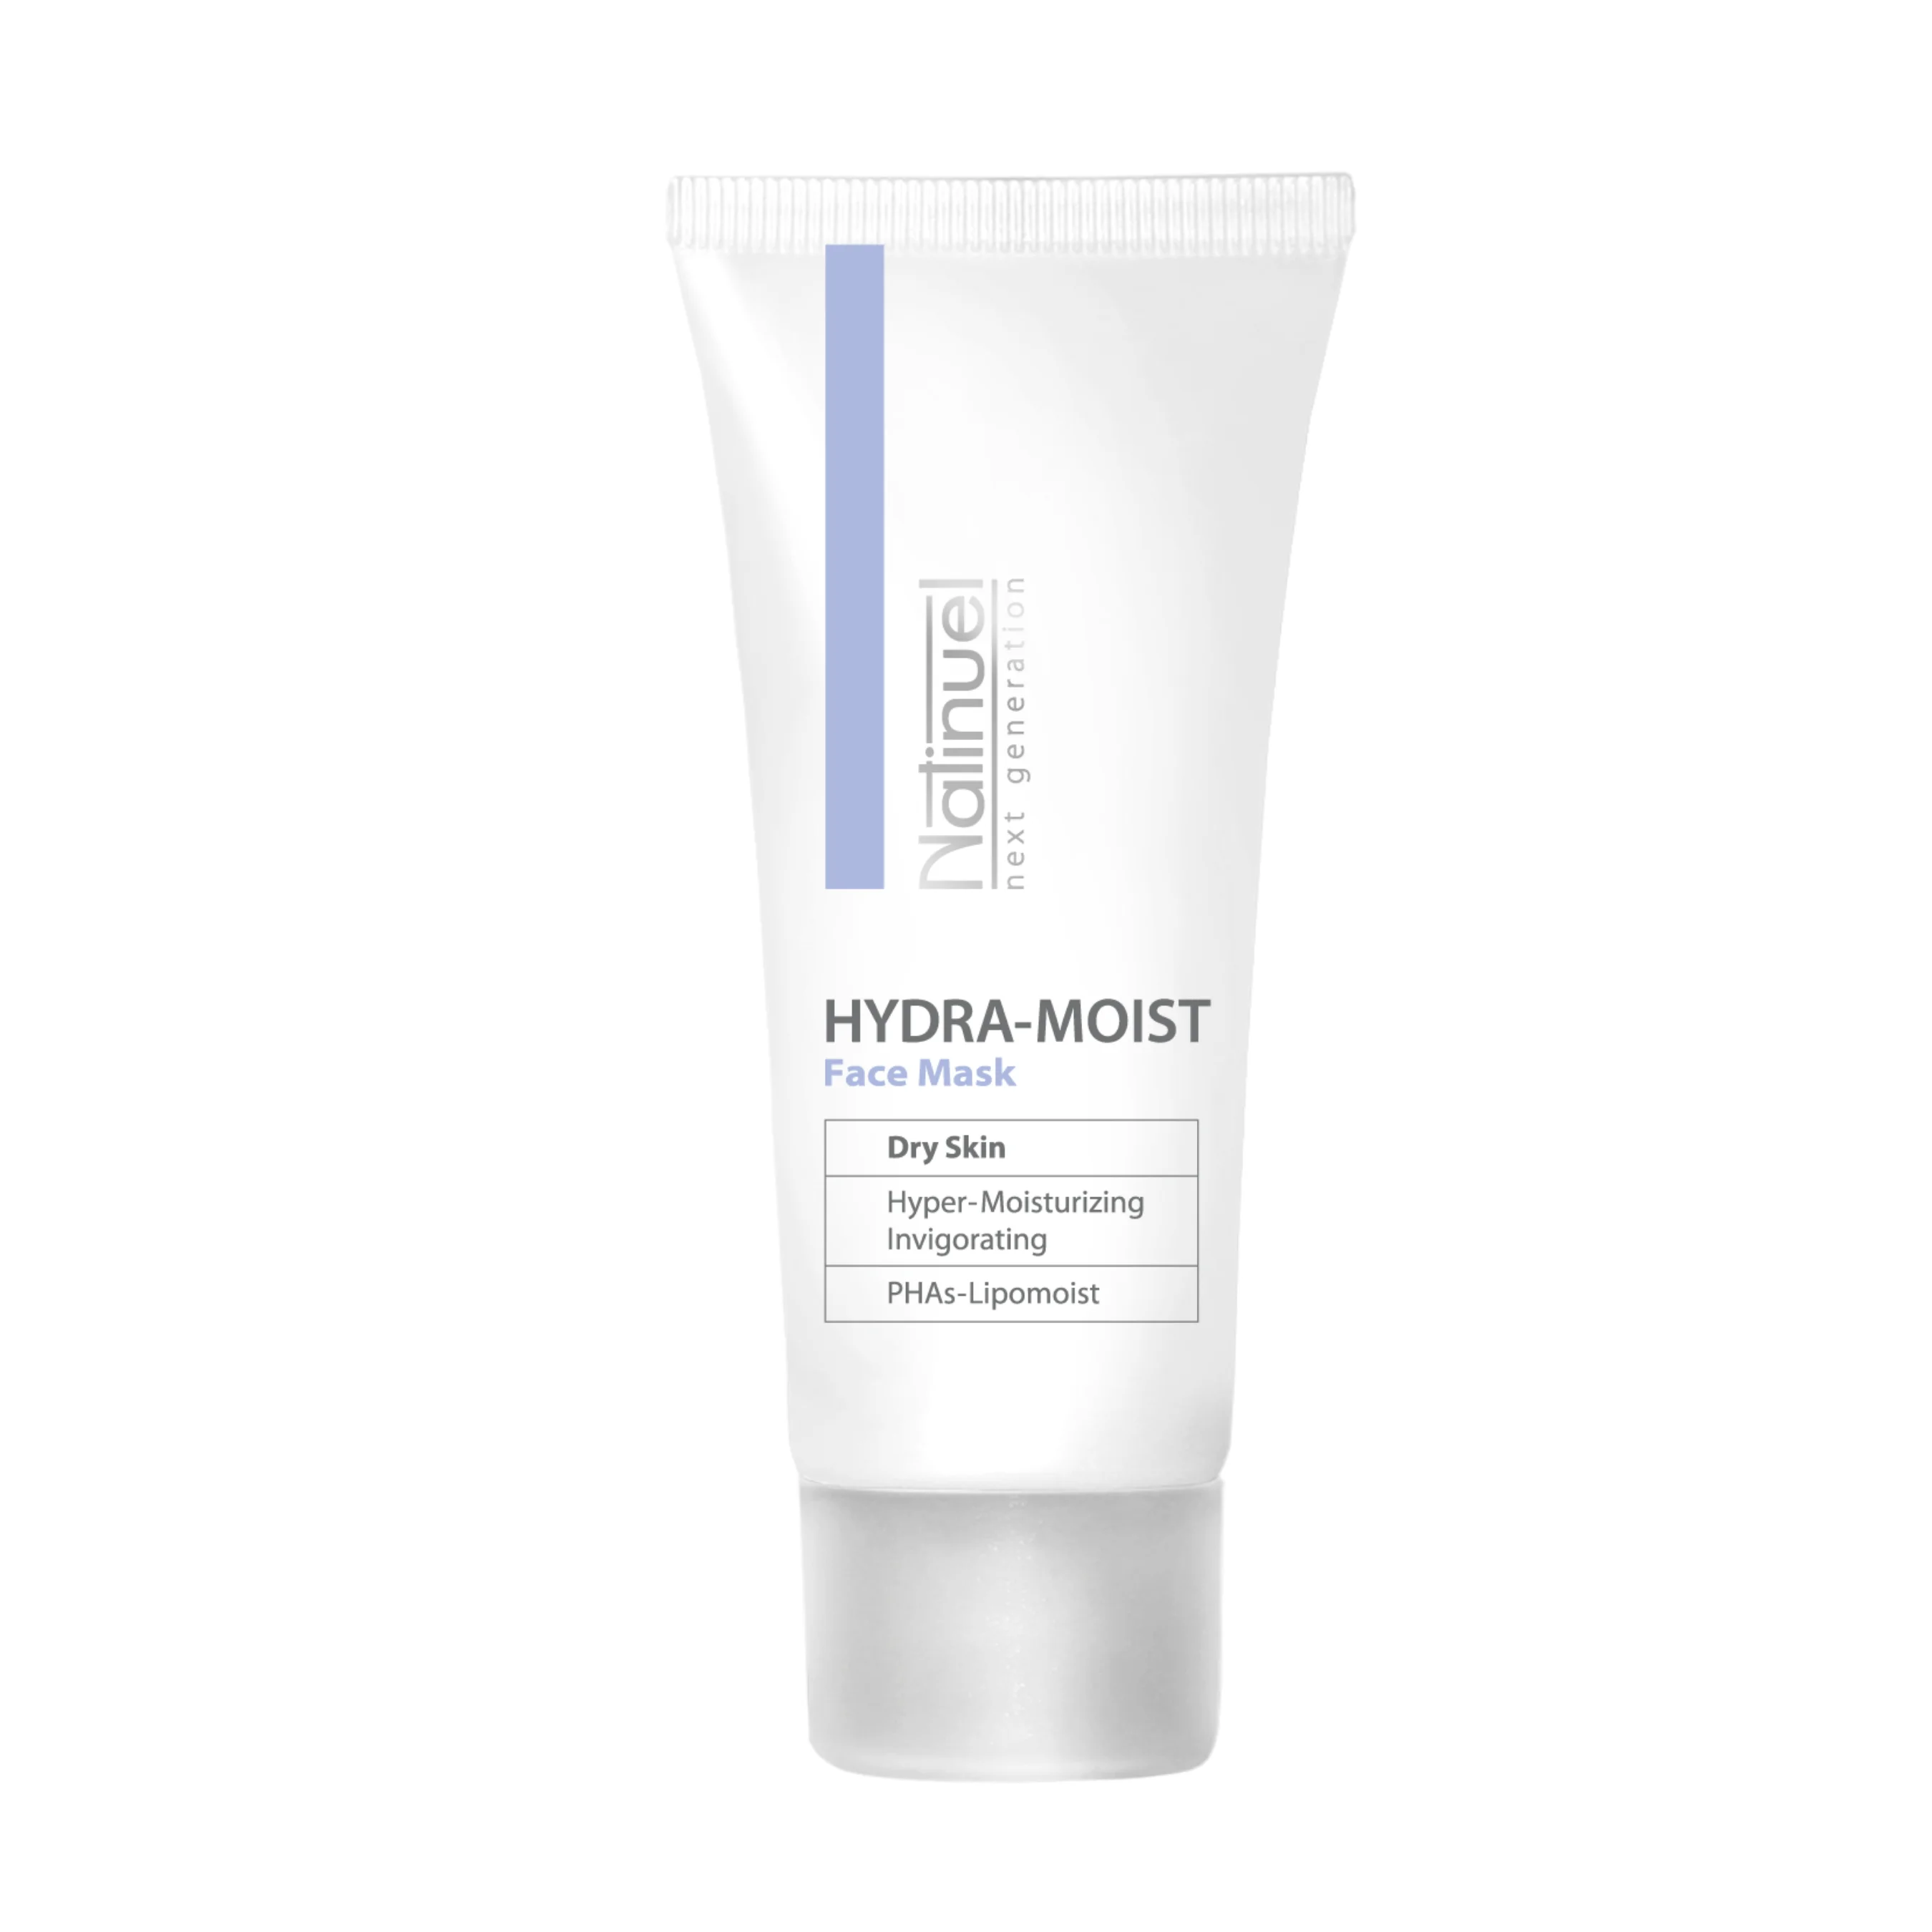 hjemmelevering Zoom ind lommelygter Source HYDRA MOIST MASK - Italian High Quality Cosmetic Moisturizing Face  mask 30ml on m.alibaba.com